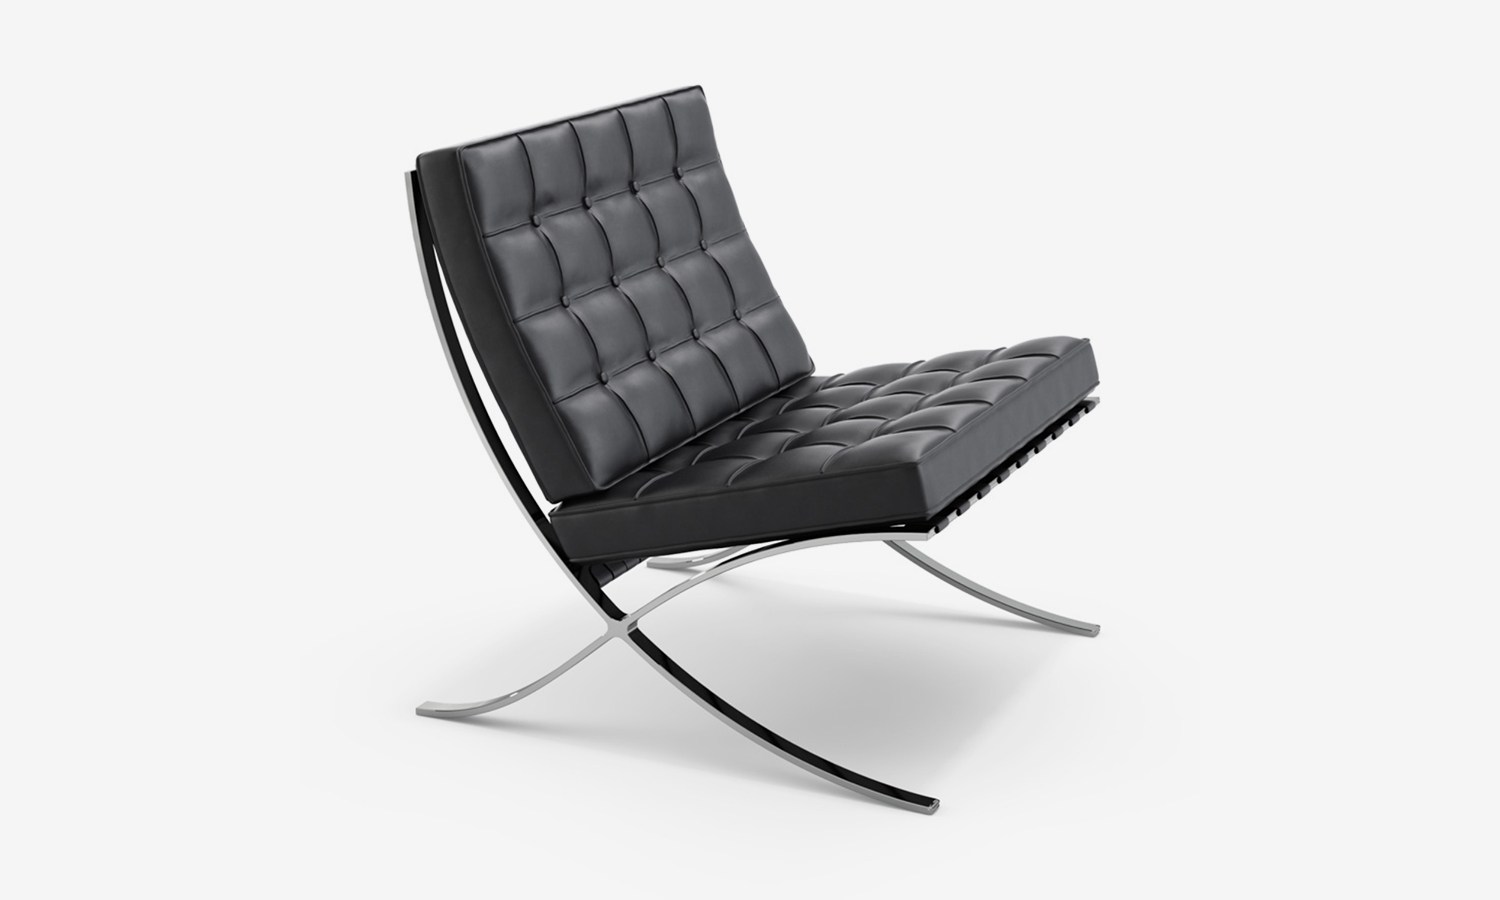 A black leather chair, with silver legs